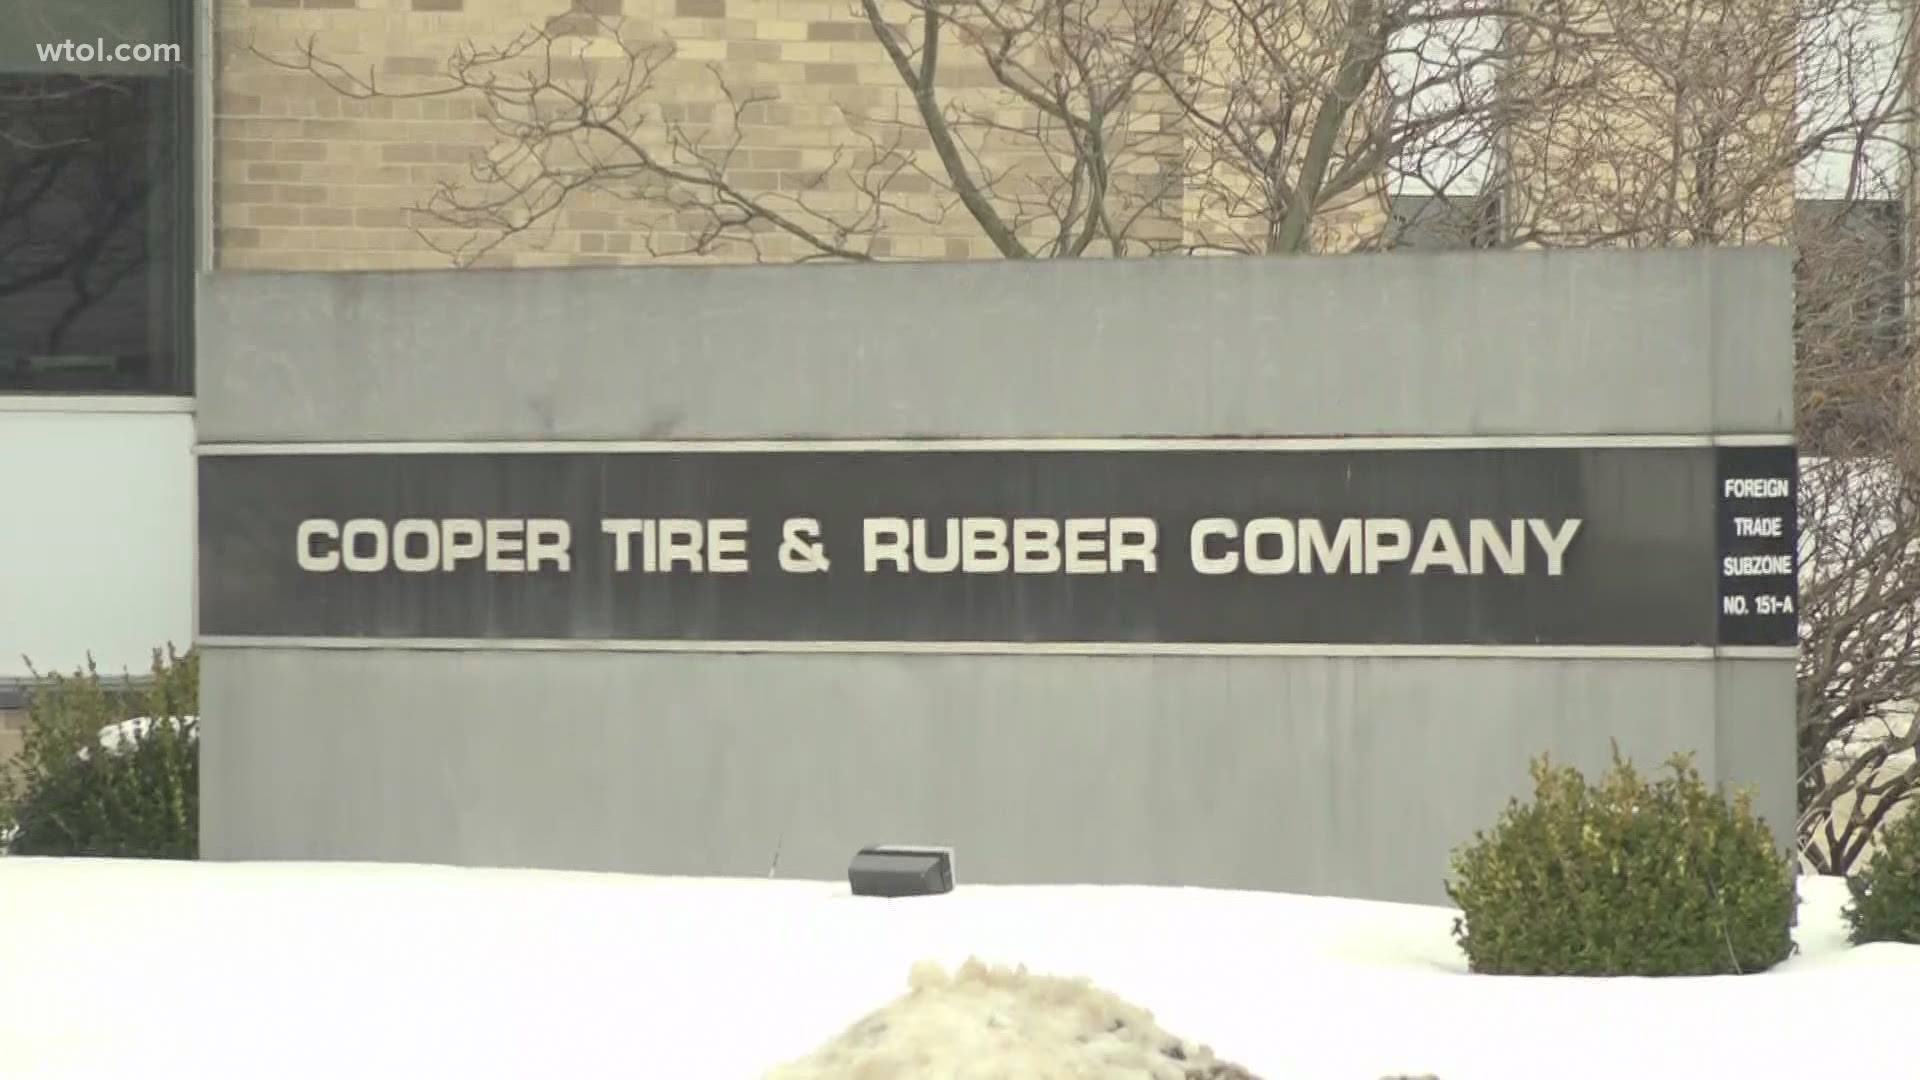 The expectation is that Findlay's Cooper Tire plant will remain in operation and could be reinvested in by new owners.